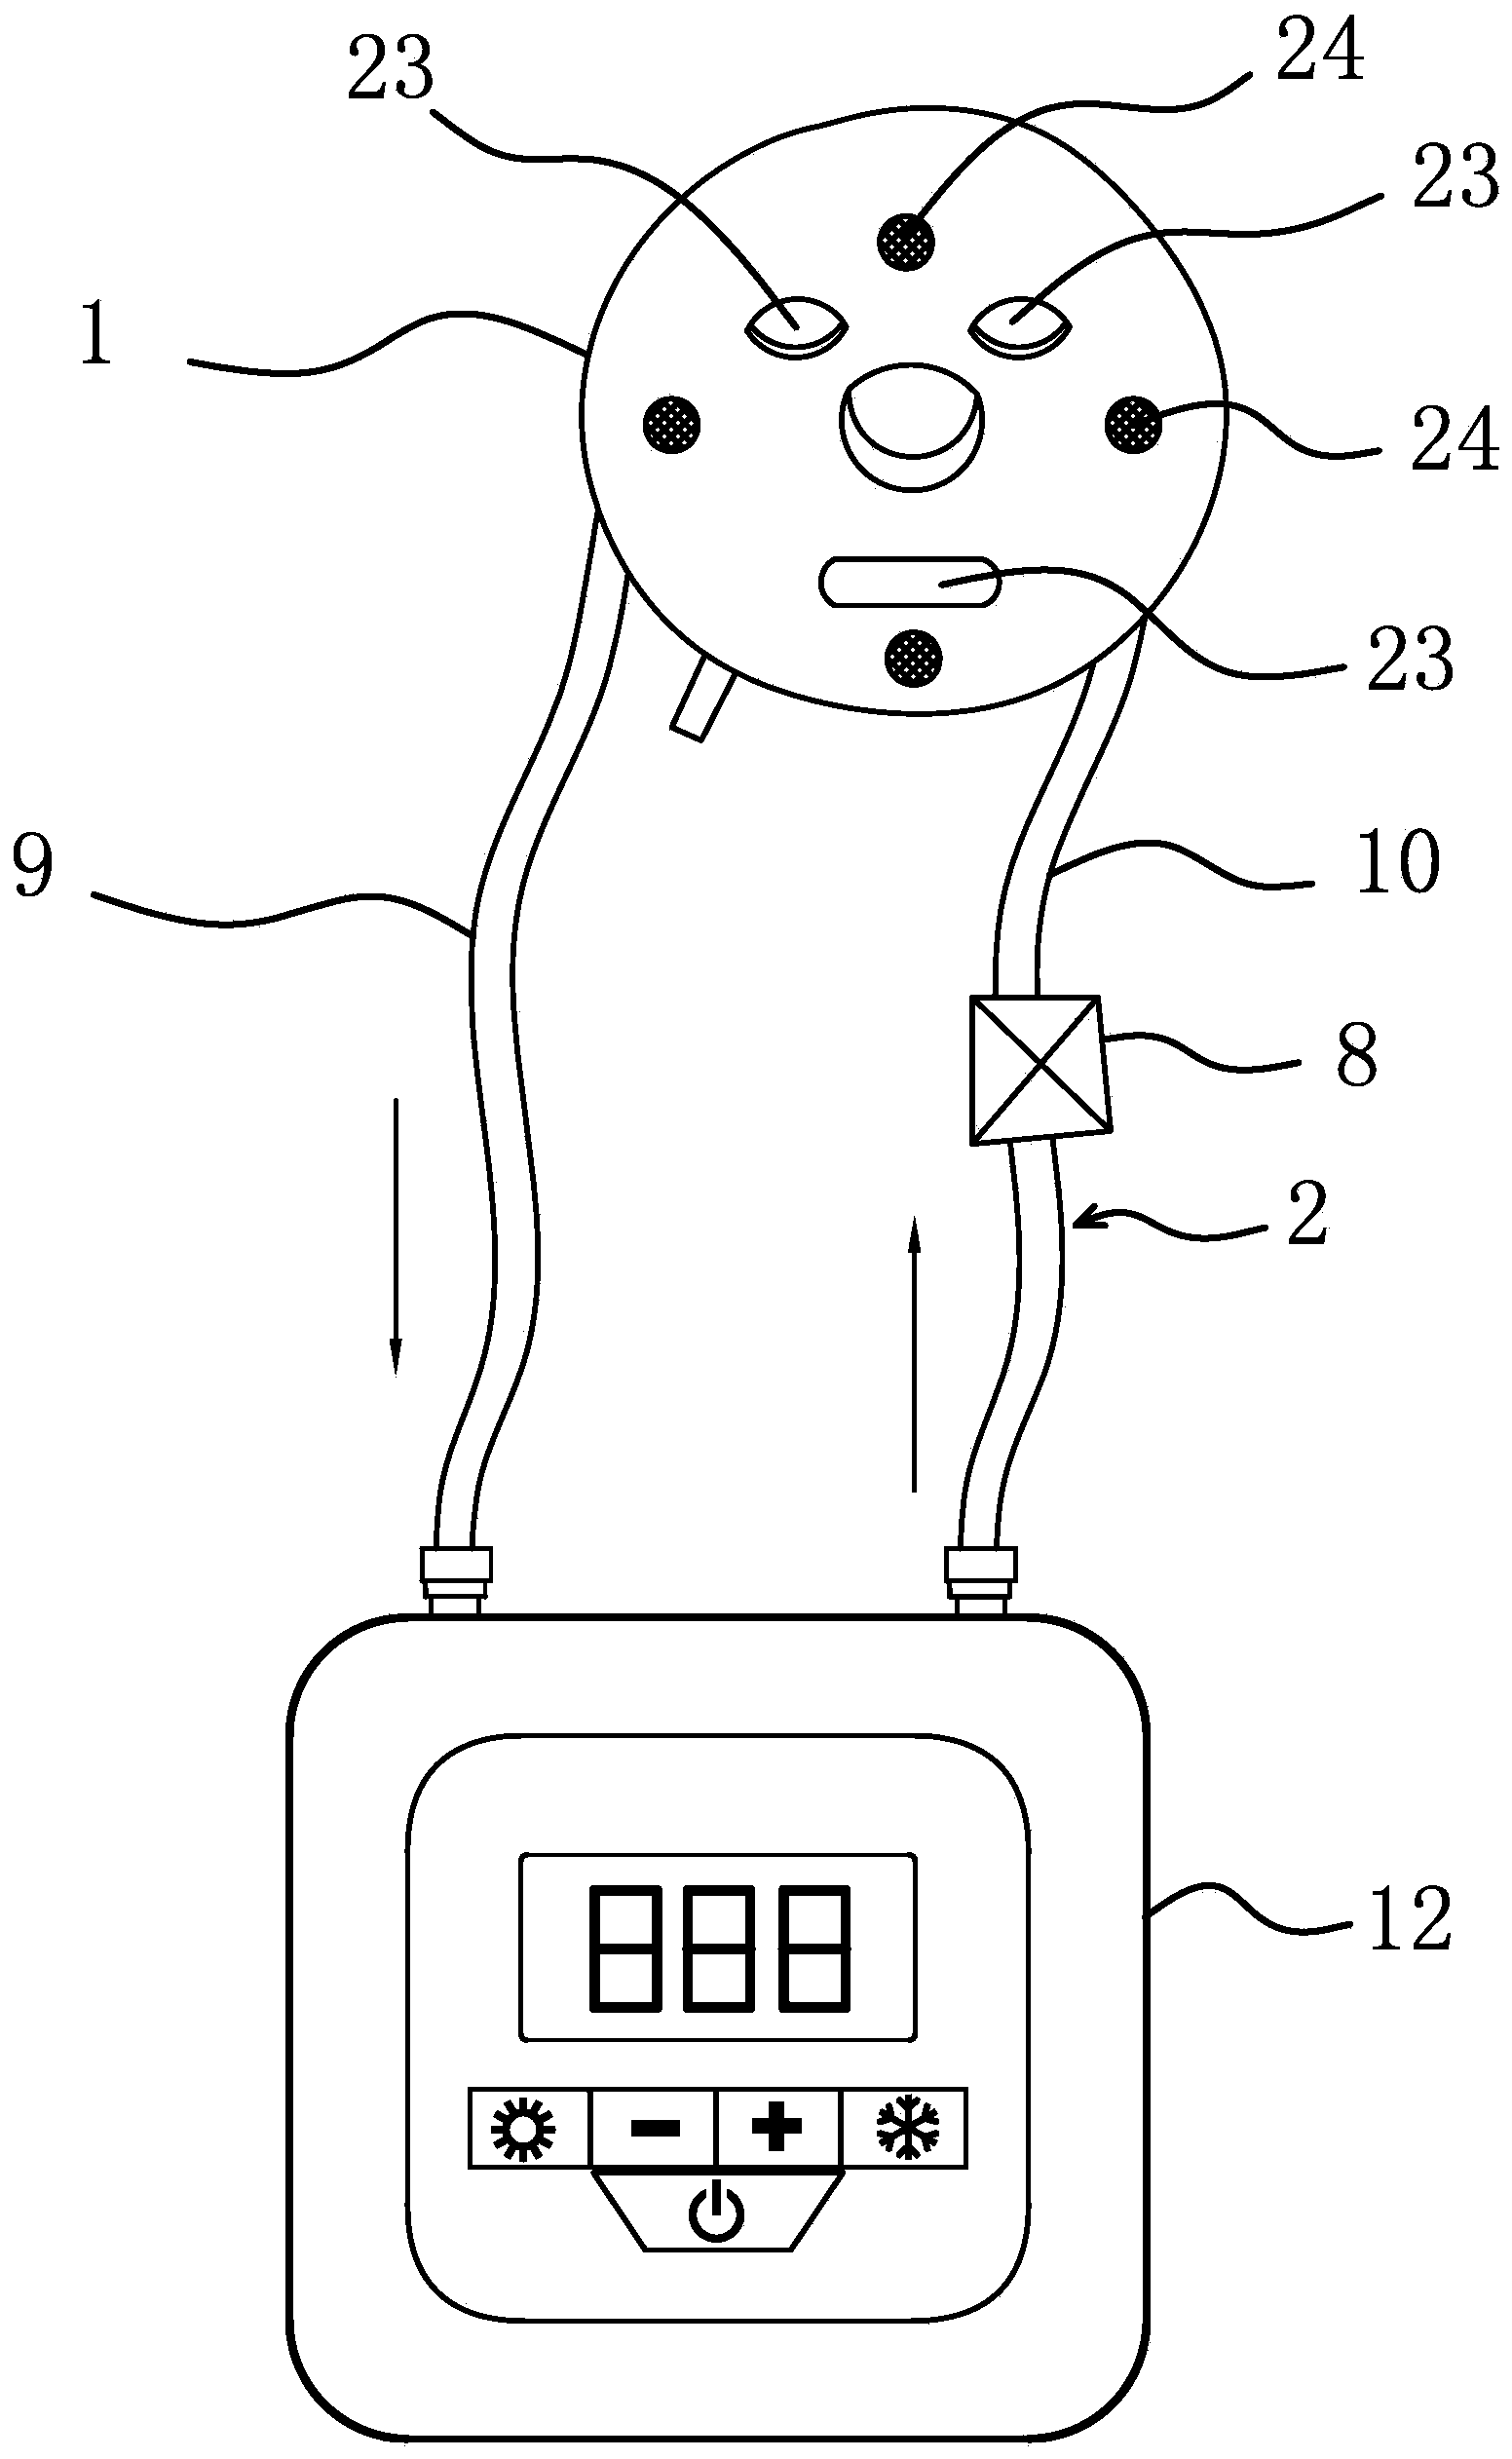 Mask device capable of being used through cold application and hot application